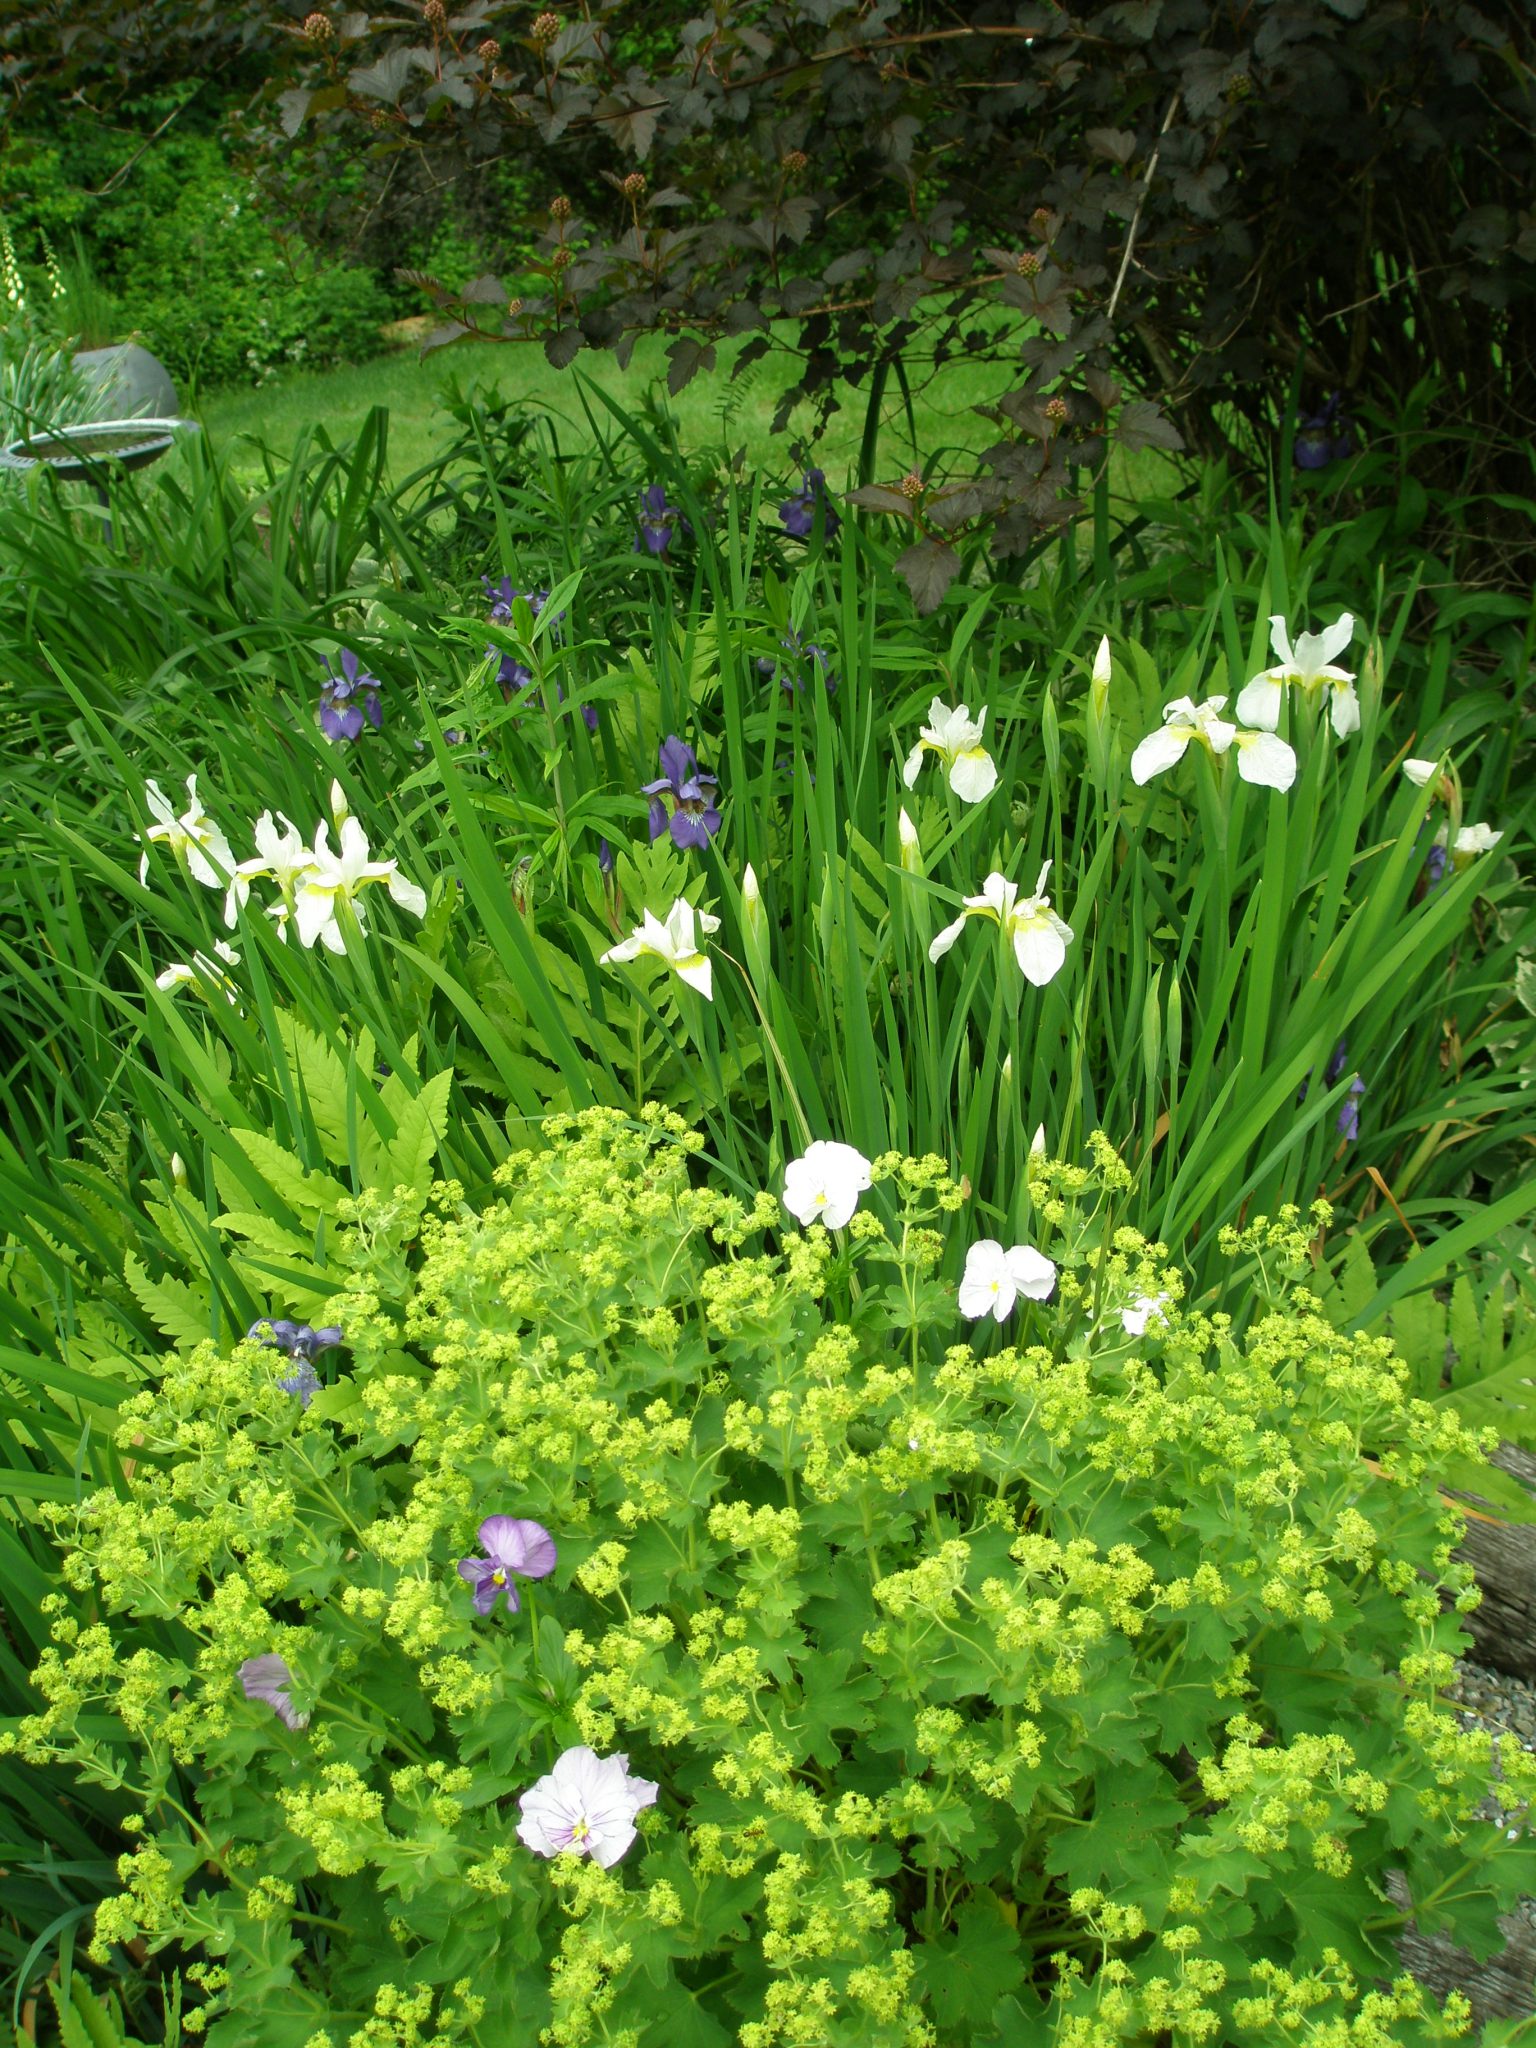 Lady's Mantle and Iris begin to flower